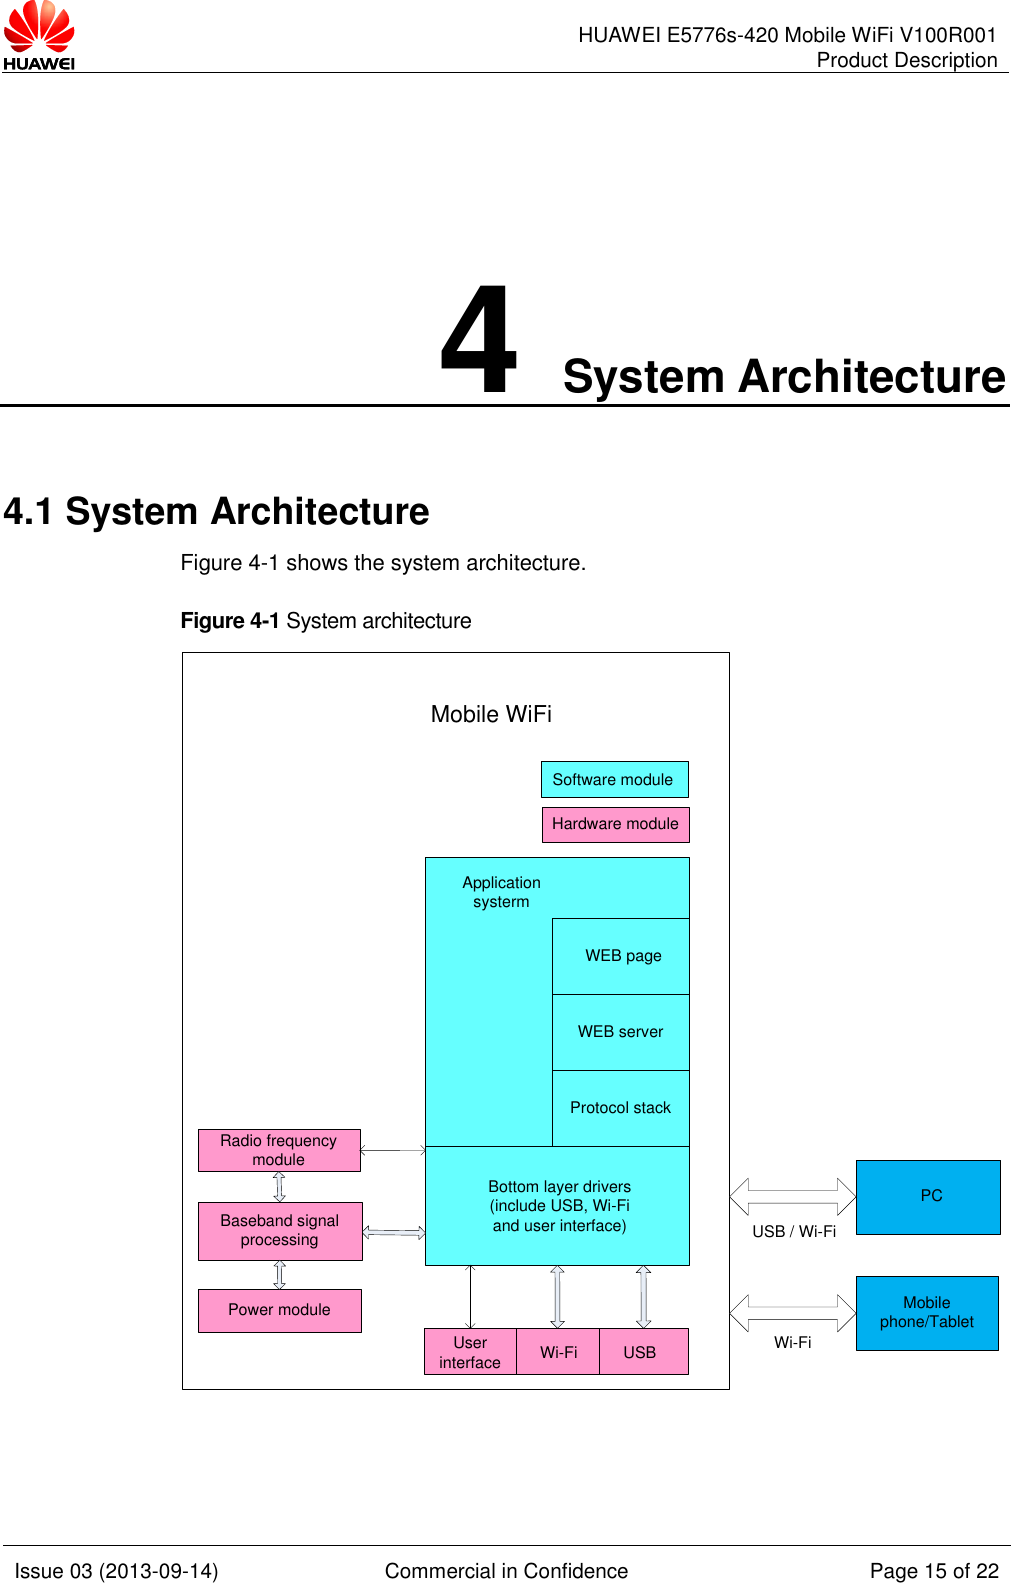      HUAWEI E5776s-420 Mobile WiFi V100R001 Product Description    Issue 03 (2013-09-14) Commercial in Confidence Page 15 of 22  4 System Architecture 4.1 System Architecture Figure 4-1 shows the system architecture. Figure 4-1 System architecture Protocol stackBottom layer drivers (include USB, Wi-Fi and user interface)Application systermWEB pageWEB serverUser interface USBWi-FiBaseband signal processingRadio frequency modulePower moduleSoftware moduleMobile WiFiPCMobile phone/Tablet USB / Wi-FiWi-FiHardware module  